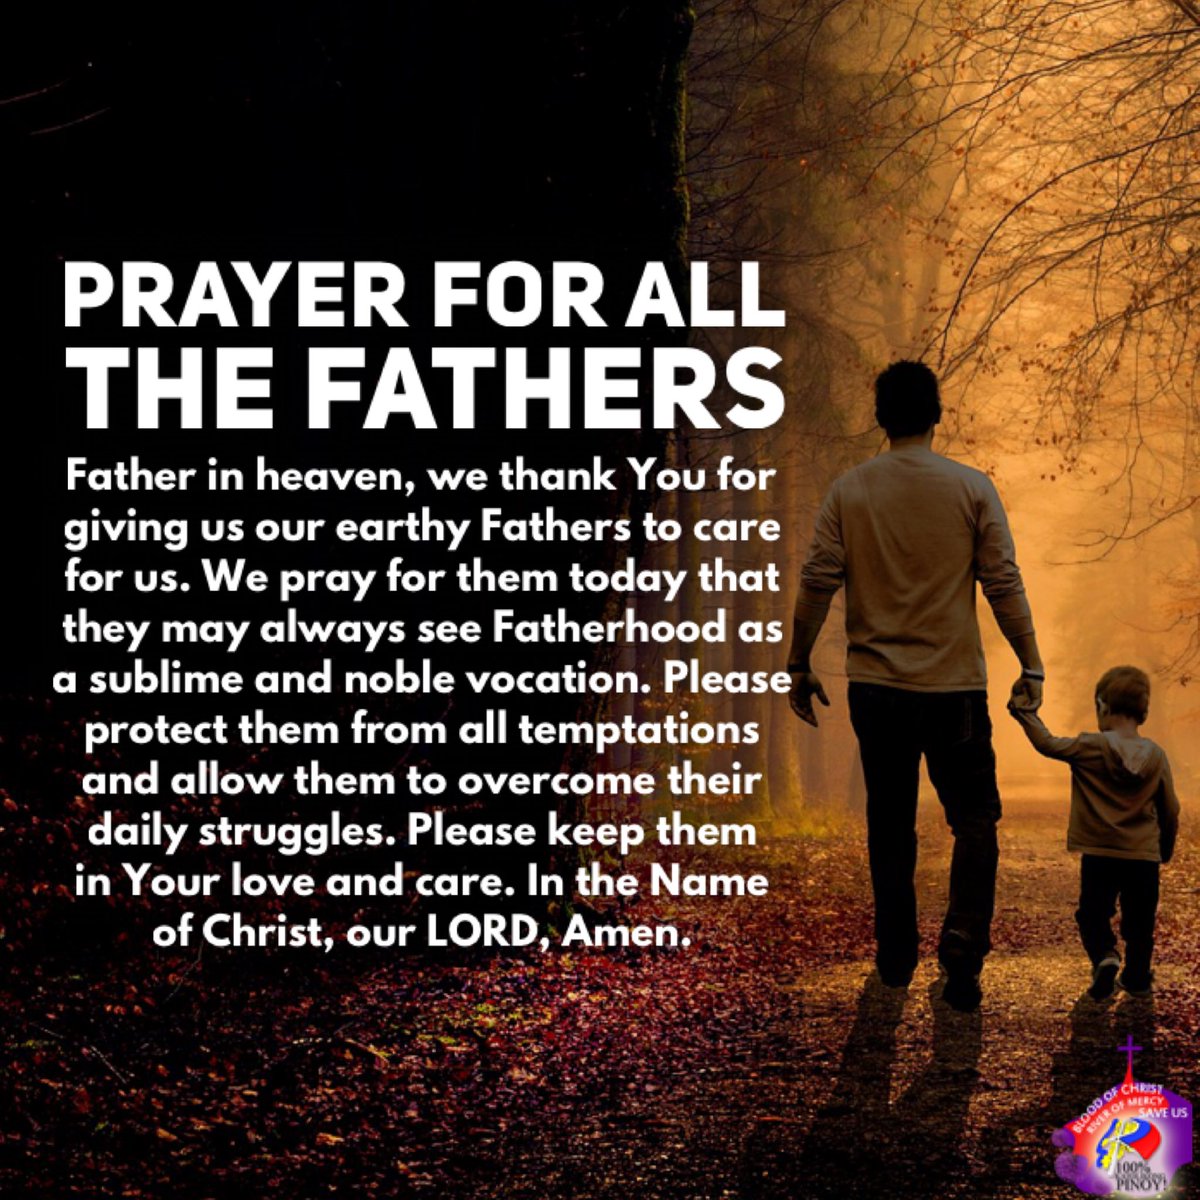 100%KATOLIKONGPINOY! on X: "PRAYER FOR ALL THE FATHERS. +In the Name of the  Father, and of the Son, and of the Holy Spirit, Amen.  https://t.co/20B2OJvQf9" / X